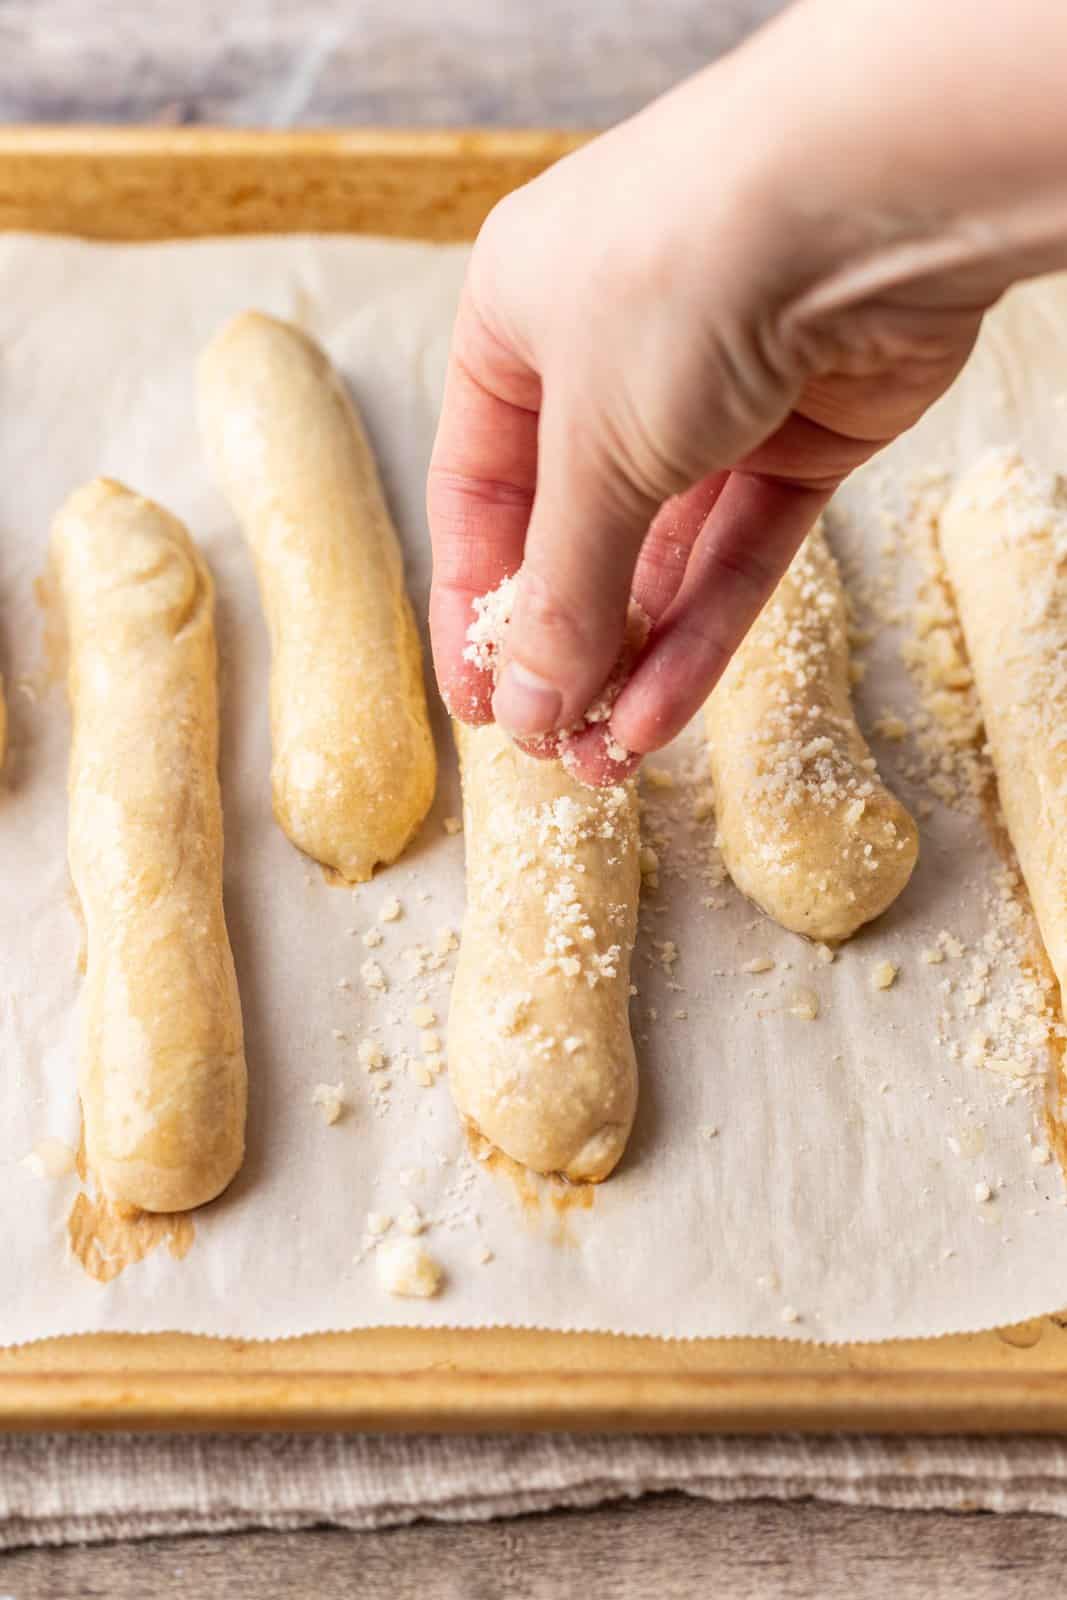 Breadsticks being sprinkled with parmesan cheese.